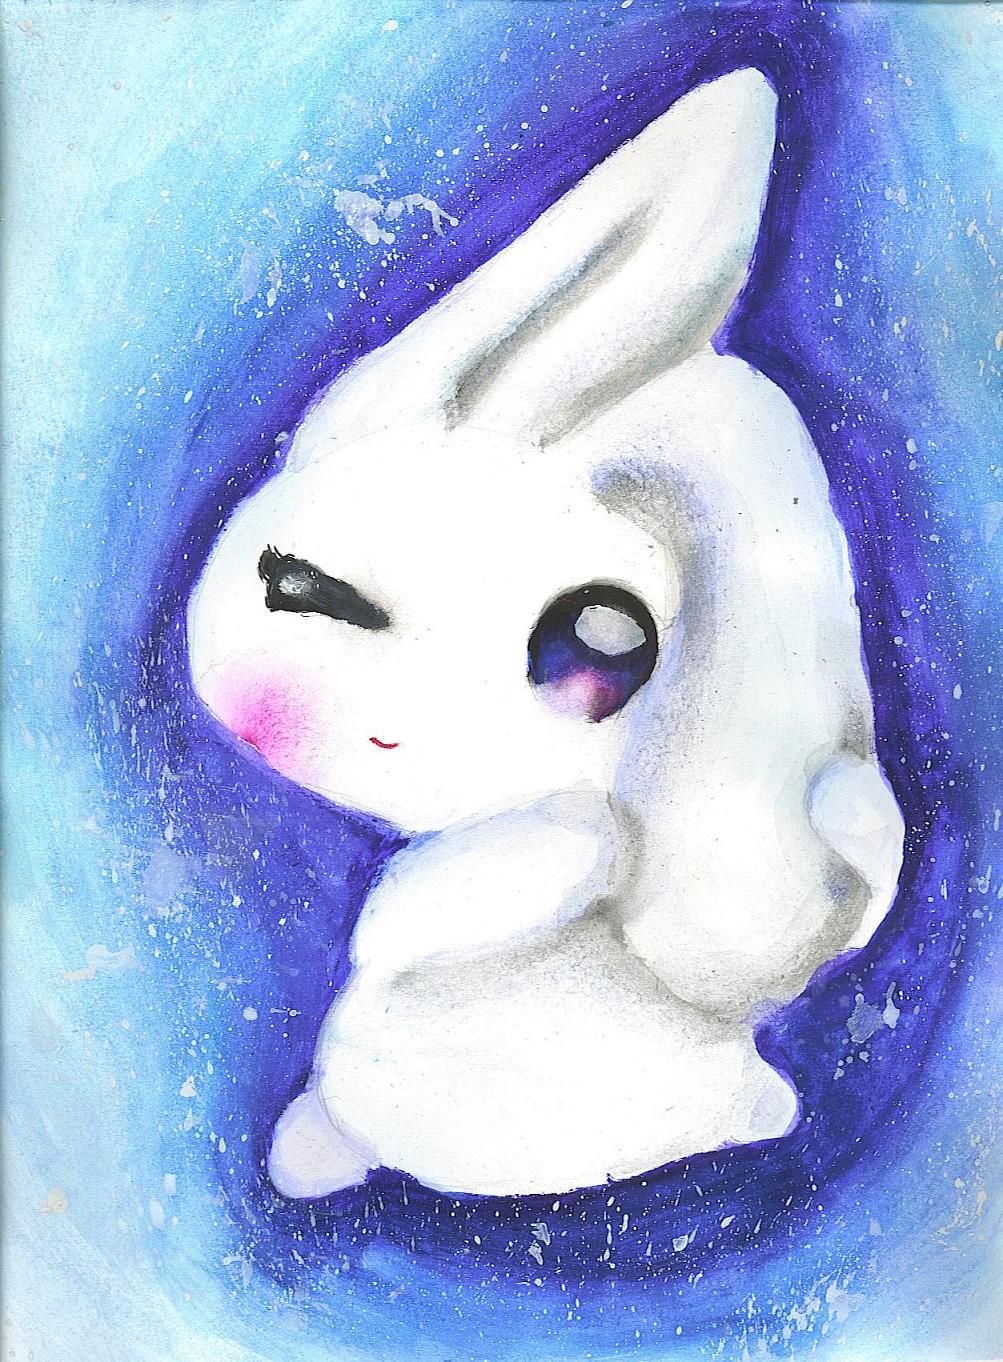 *Anime Bunny by crazy-about-drawing - Fanart Central